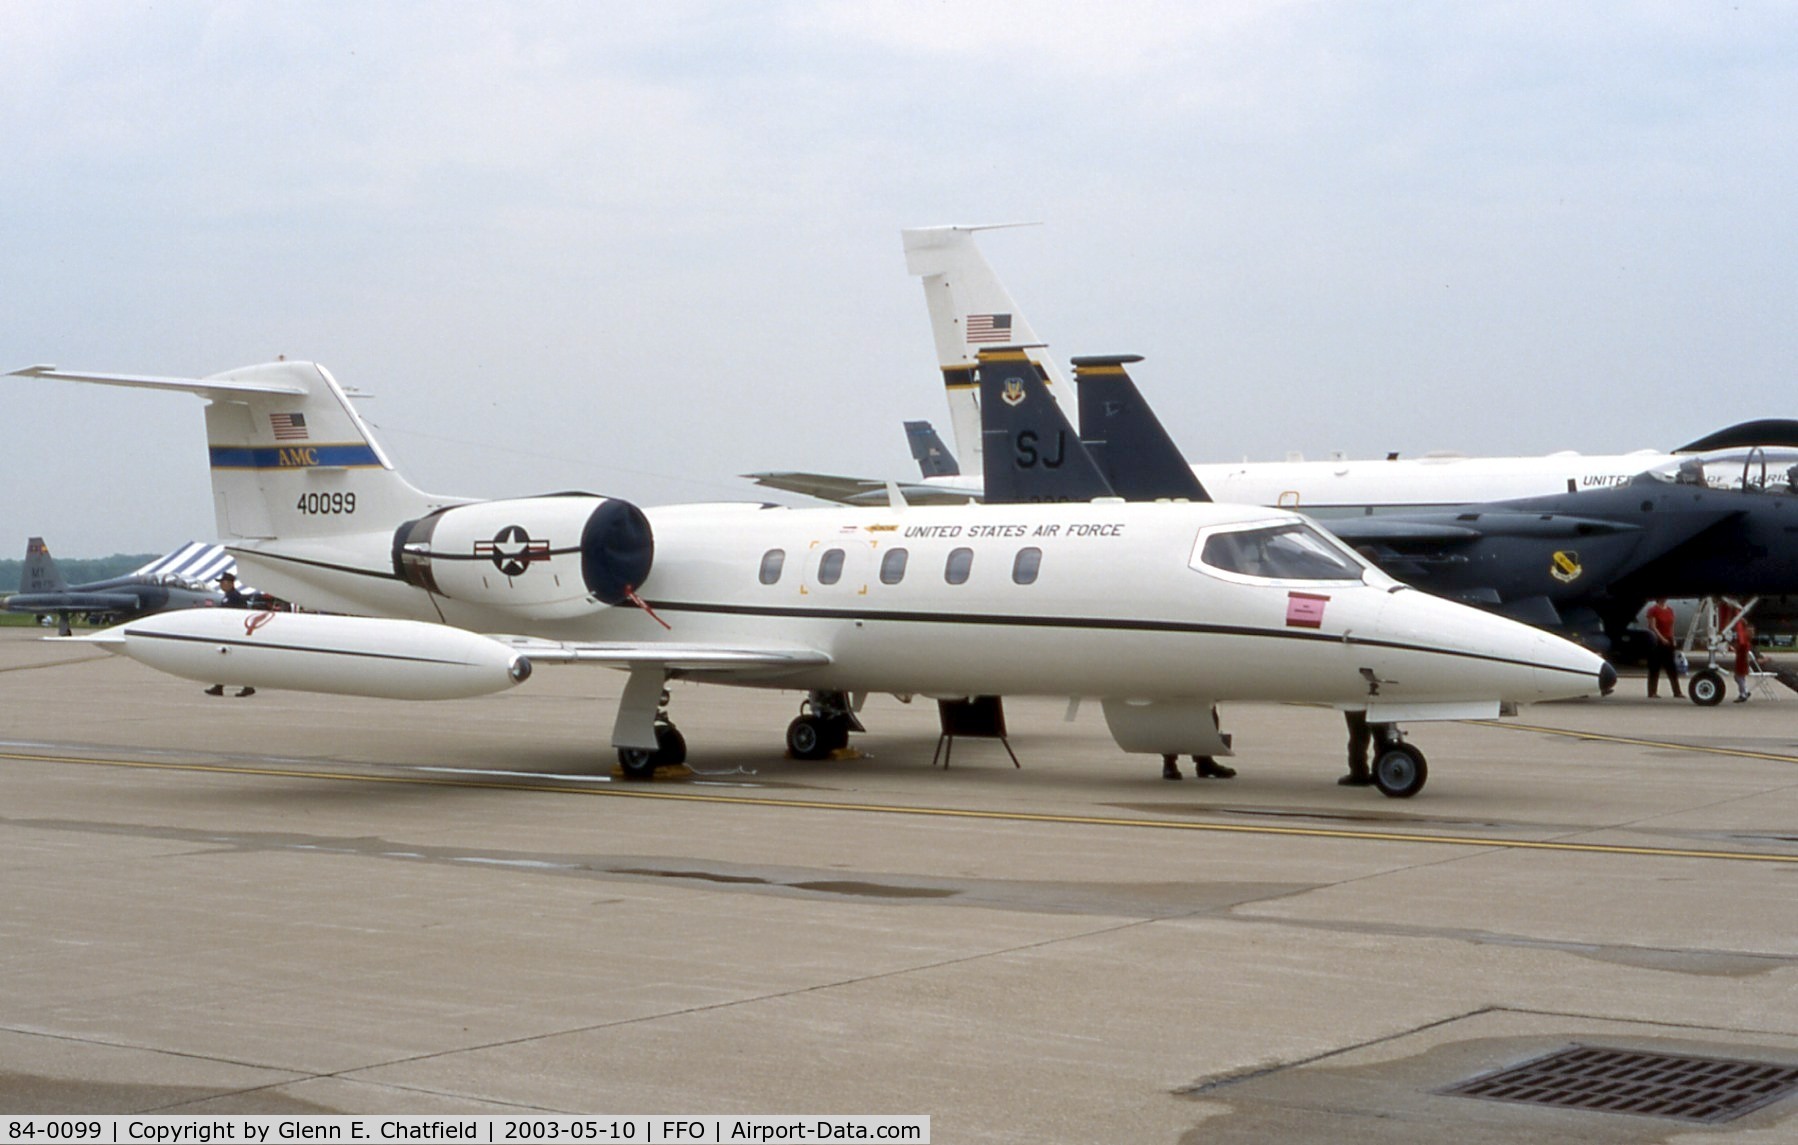 84-0099, 1984 Gates Learjet C-21A (35) C/N 35A-545, C-21A at the 100th Anniversary of Flight celebration